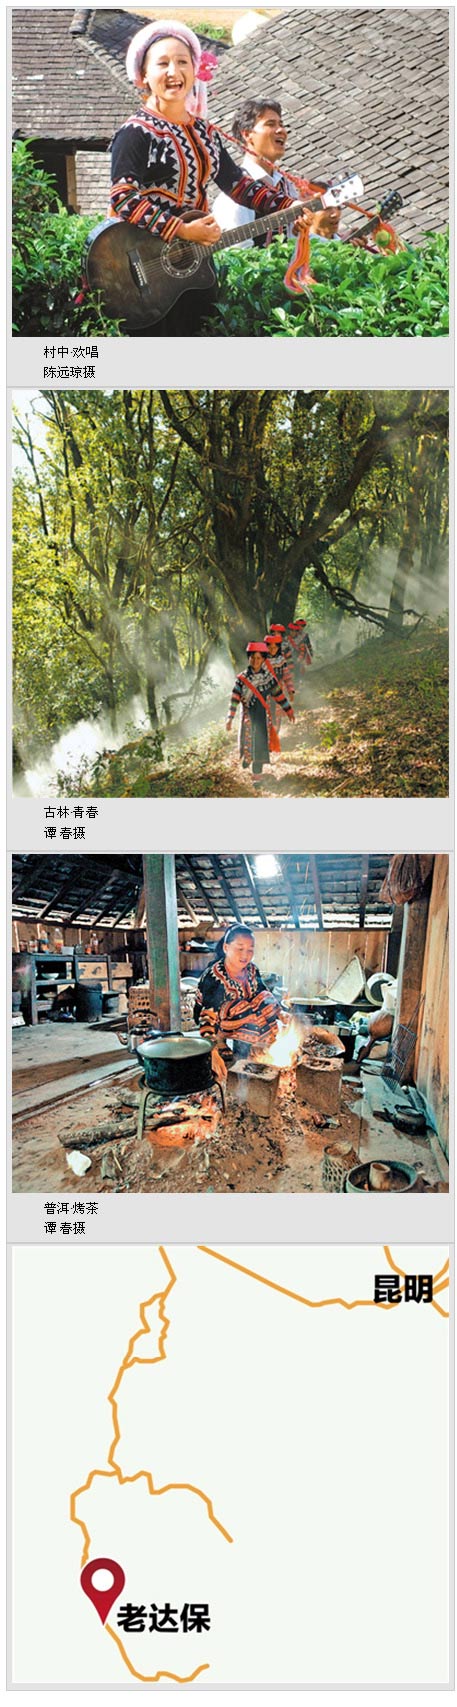 Find the most beautiful village: Laodabao Village in Pu'er